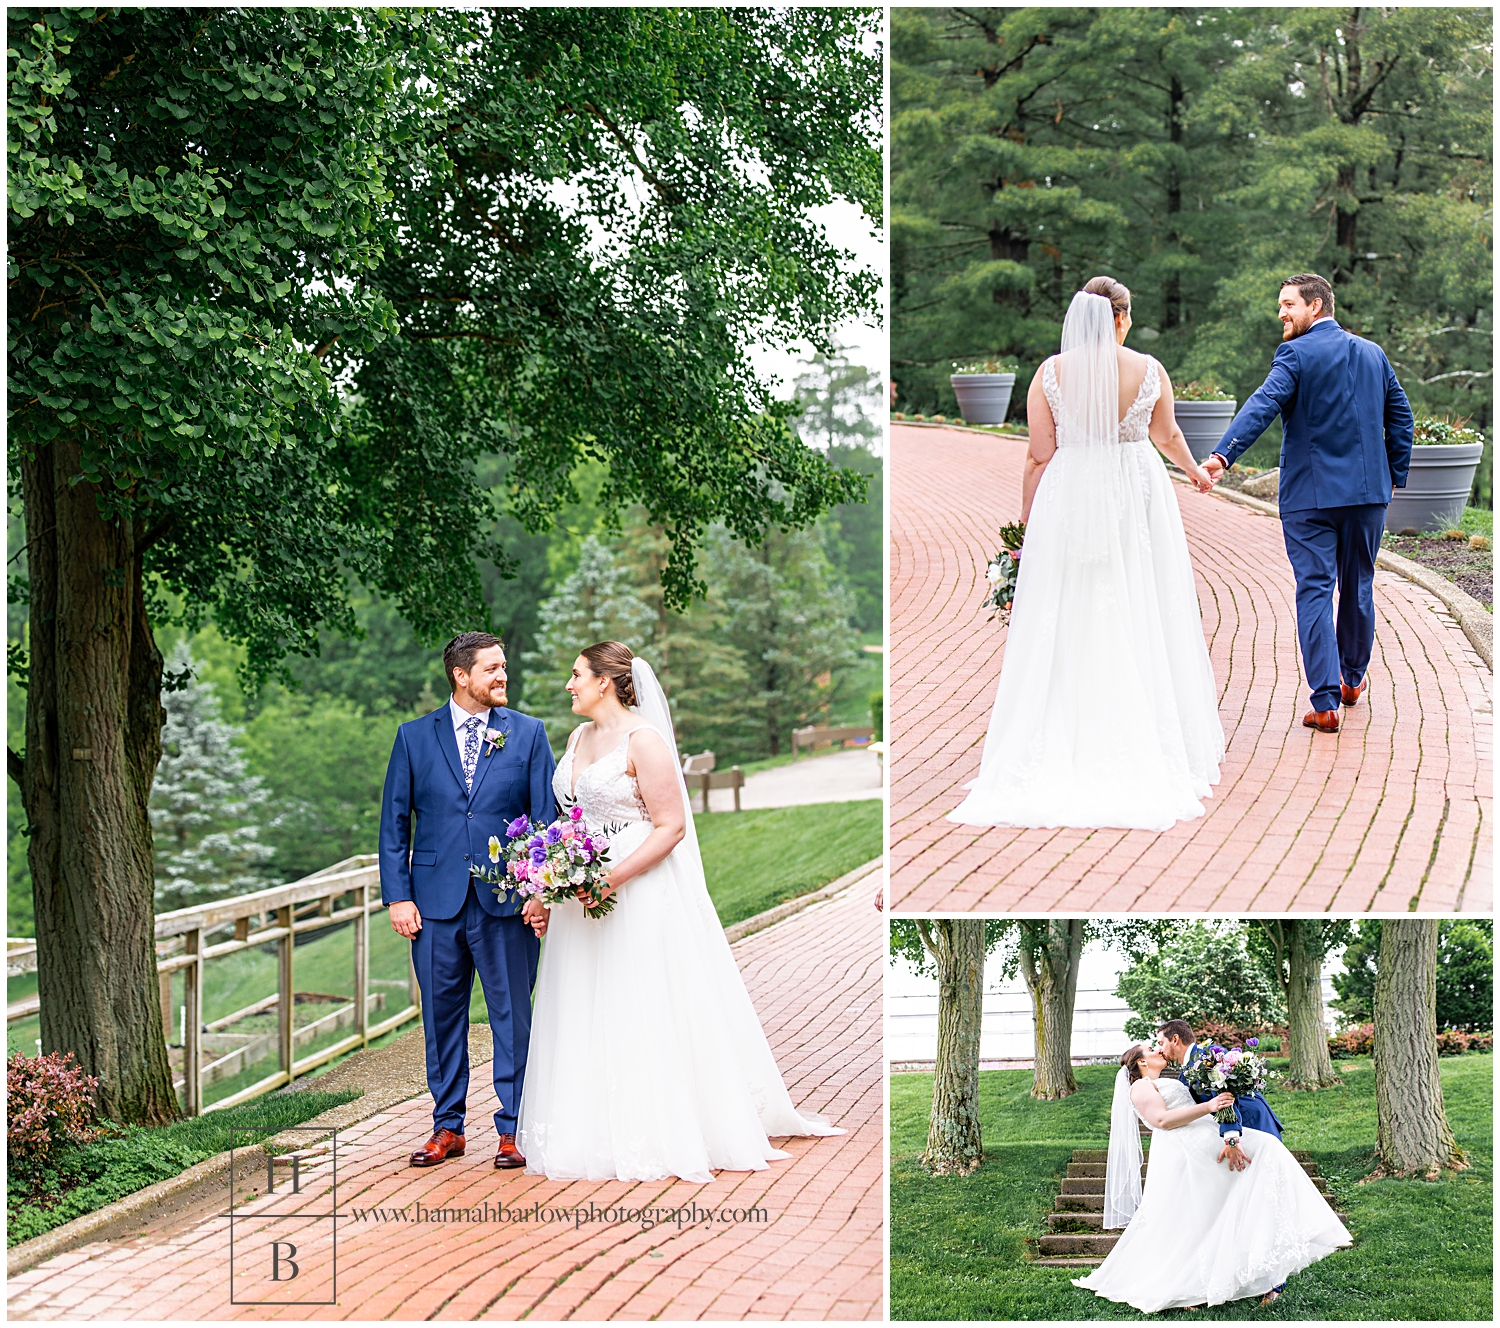 Bride and groom walk down red brick path for wedding portraits.